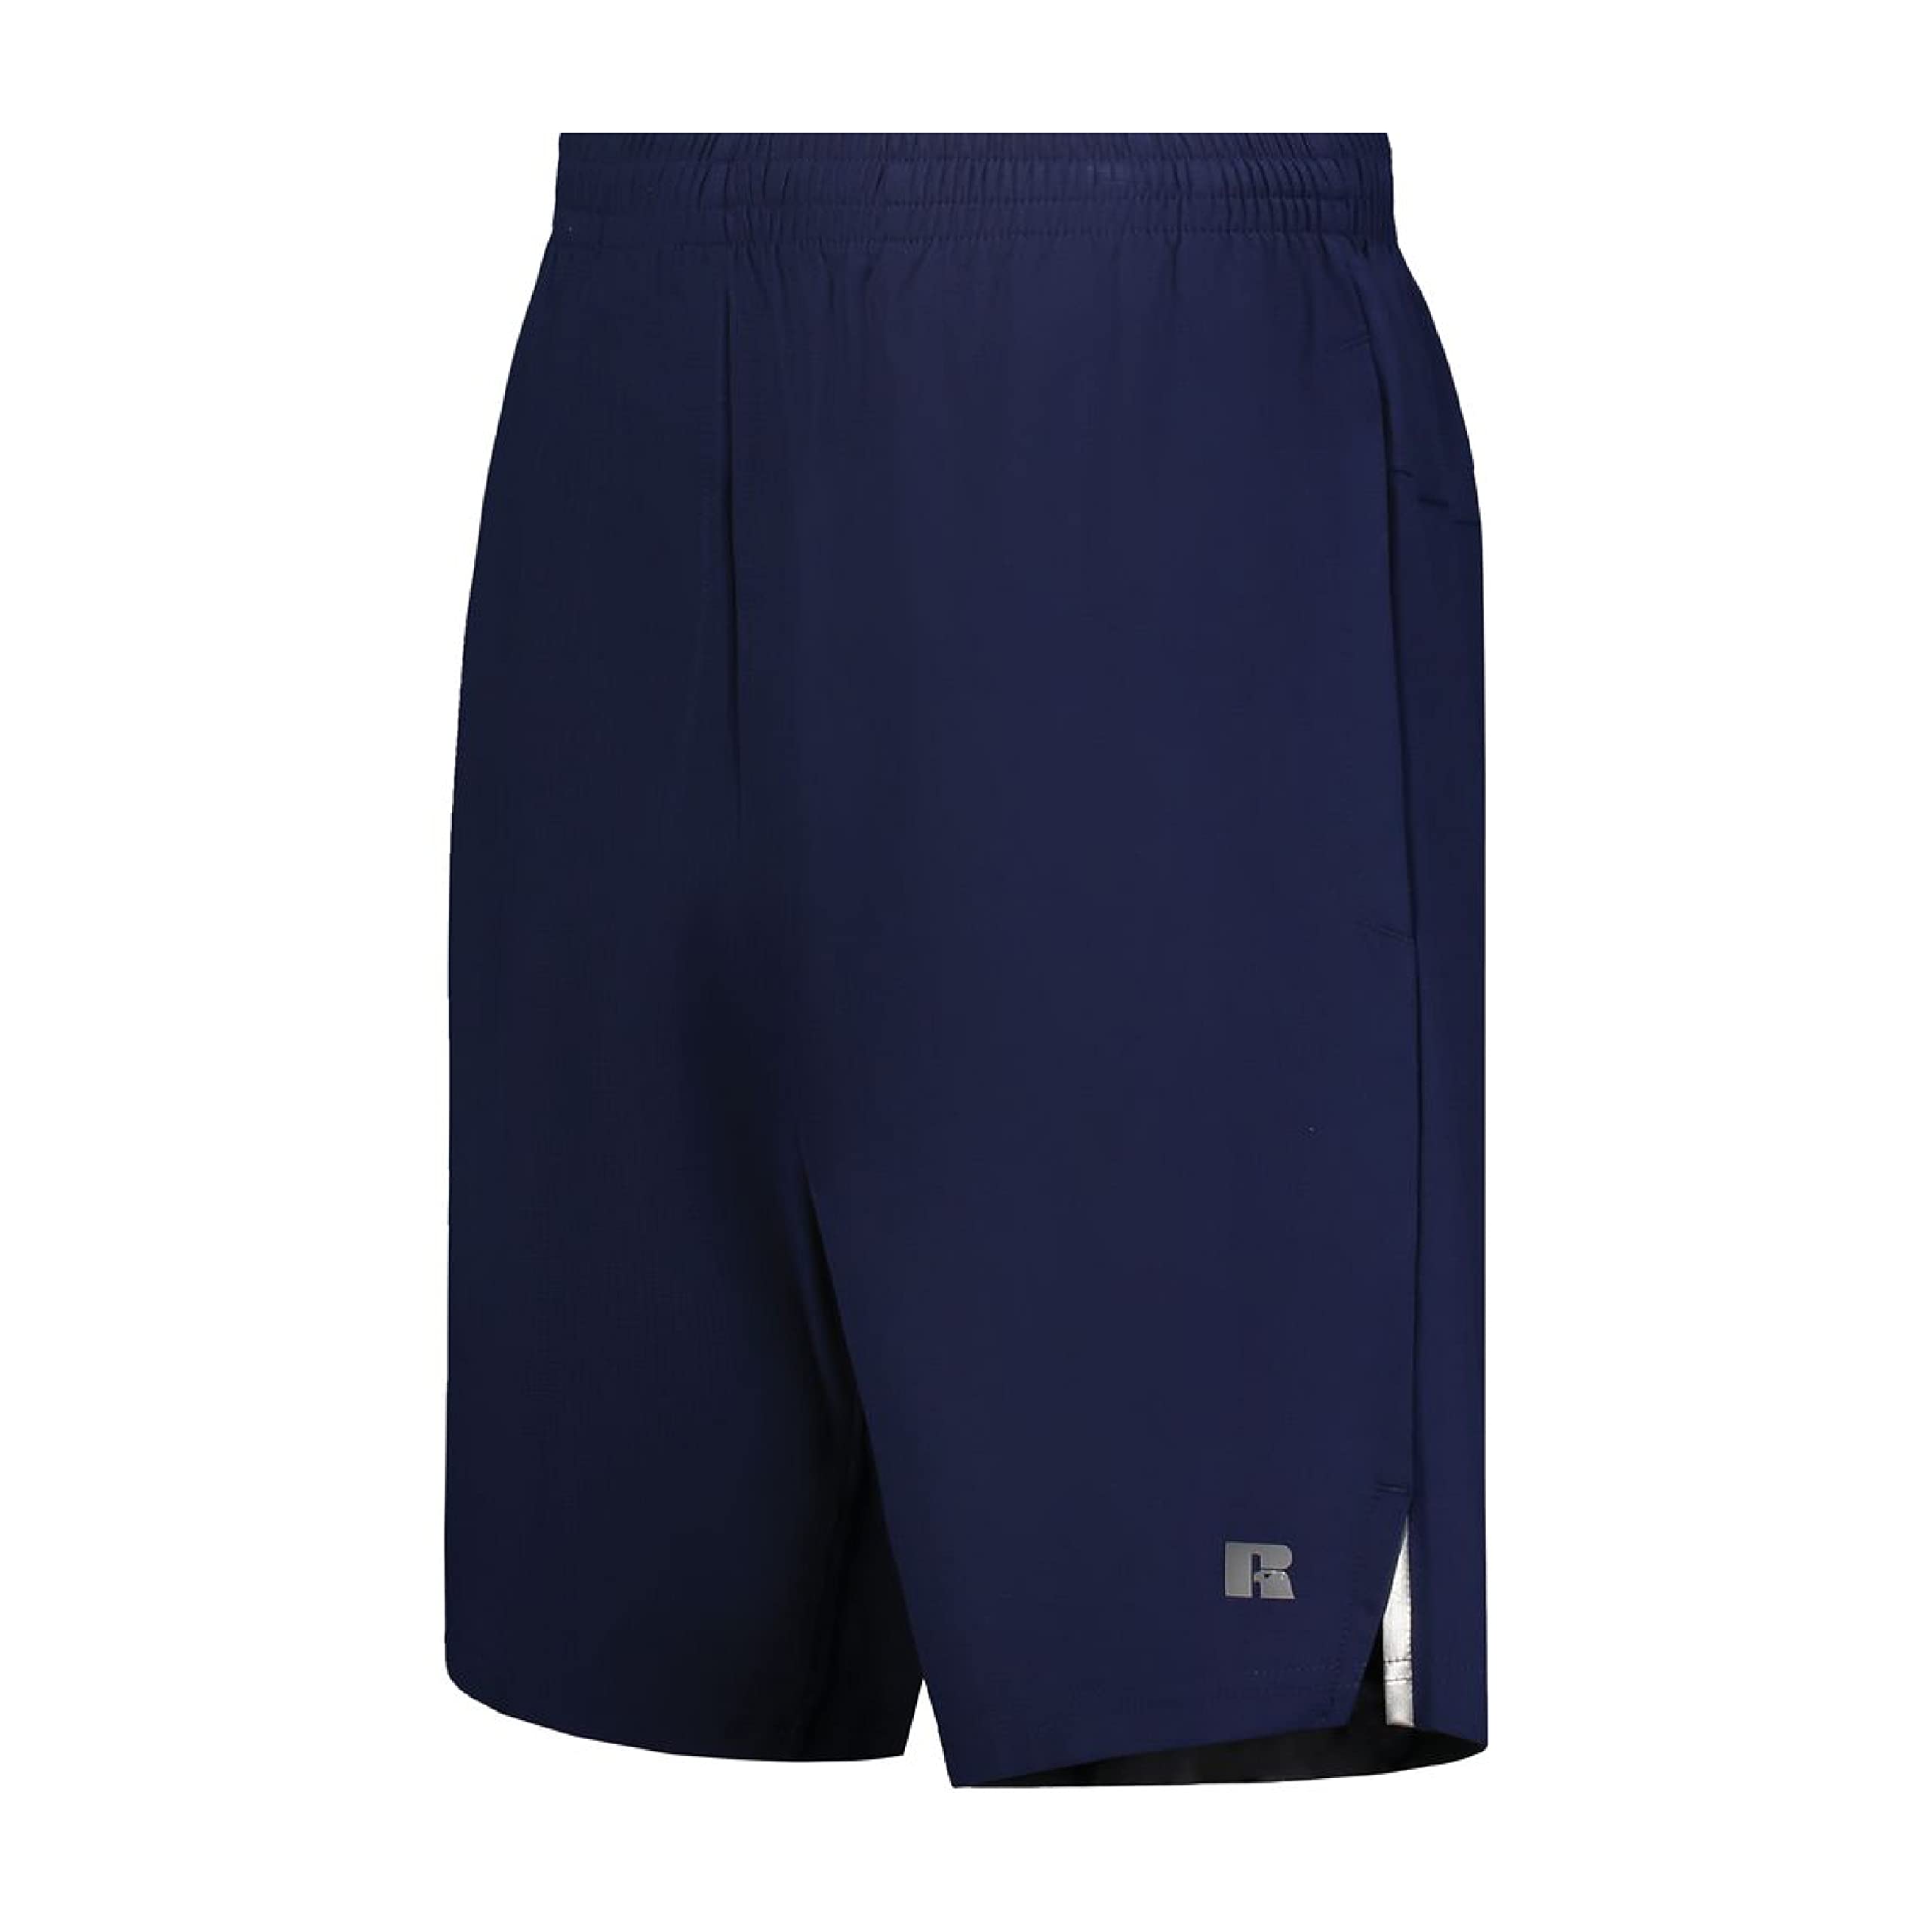 Russell Athletic Men's Legend Stretch Woven Shorts (Navy) $6.37 + Free Shipping w/ Prime or on $35+